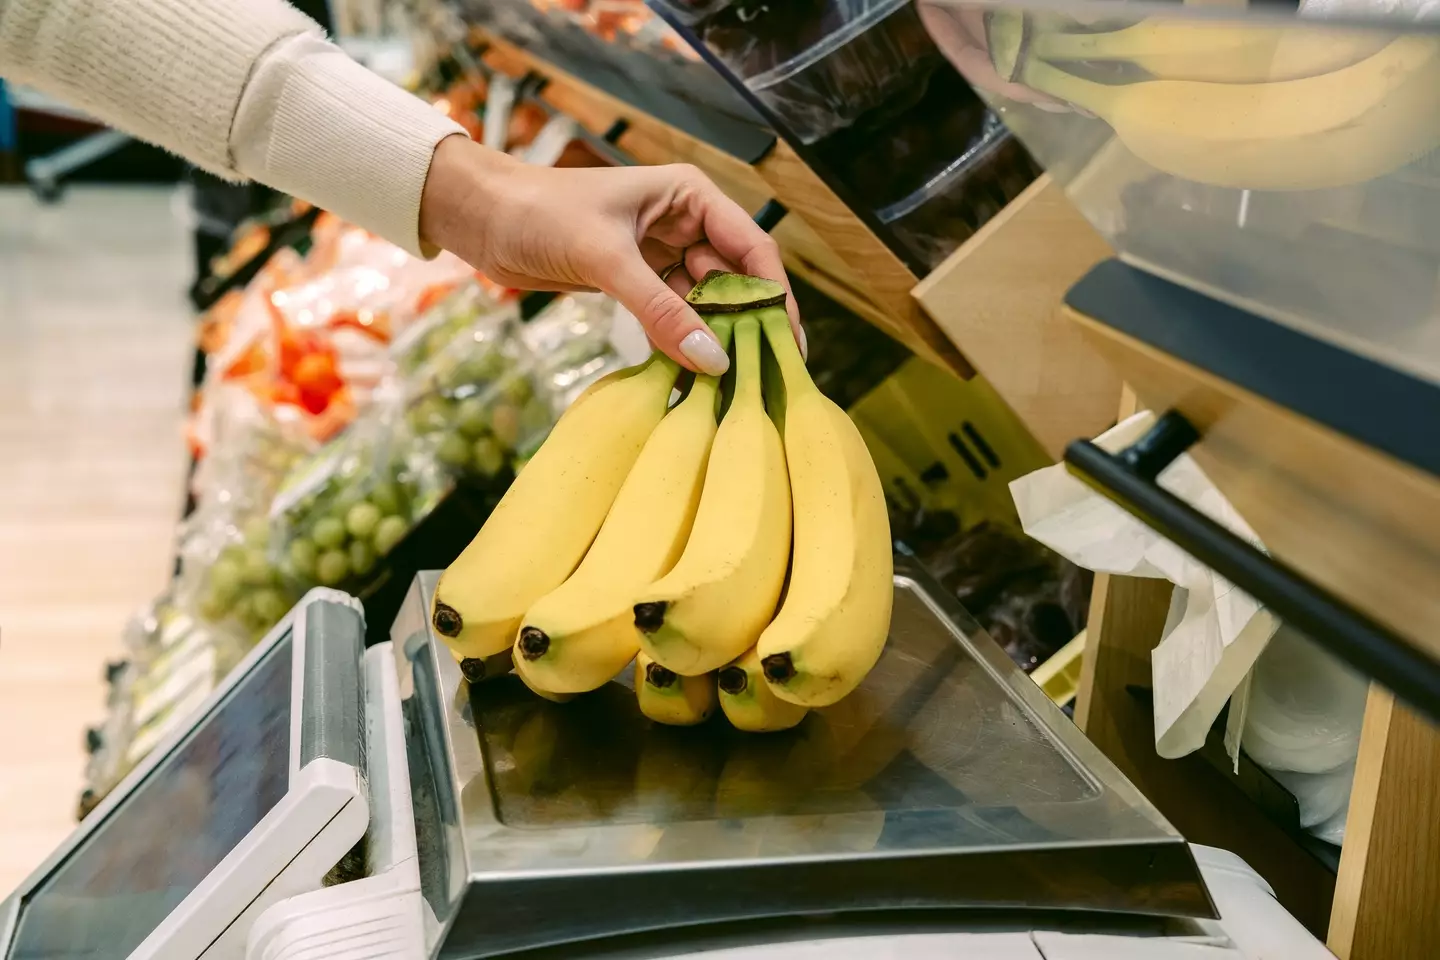 A dating coach has told us everything we need to know about the 'banana theory' dating trend. (Elena Noviello / Getty Images)